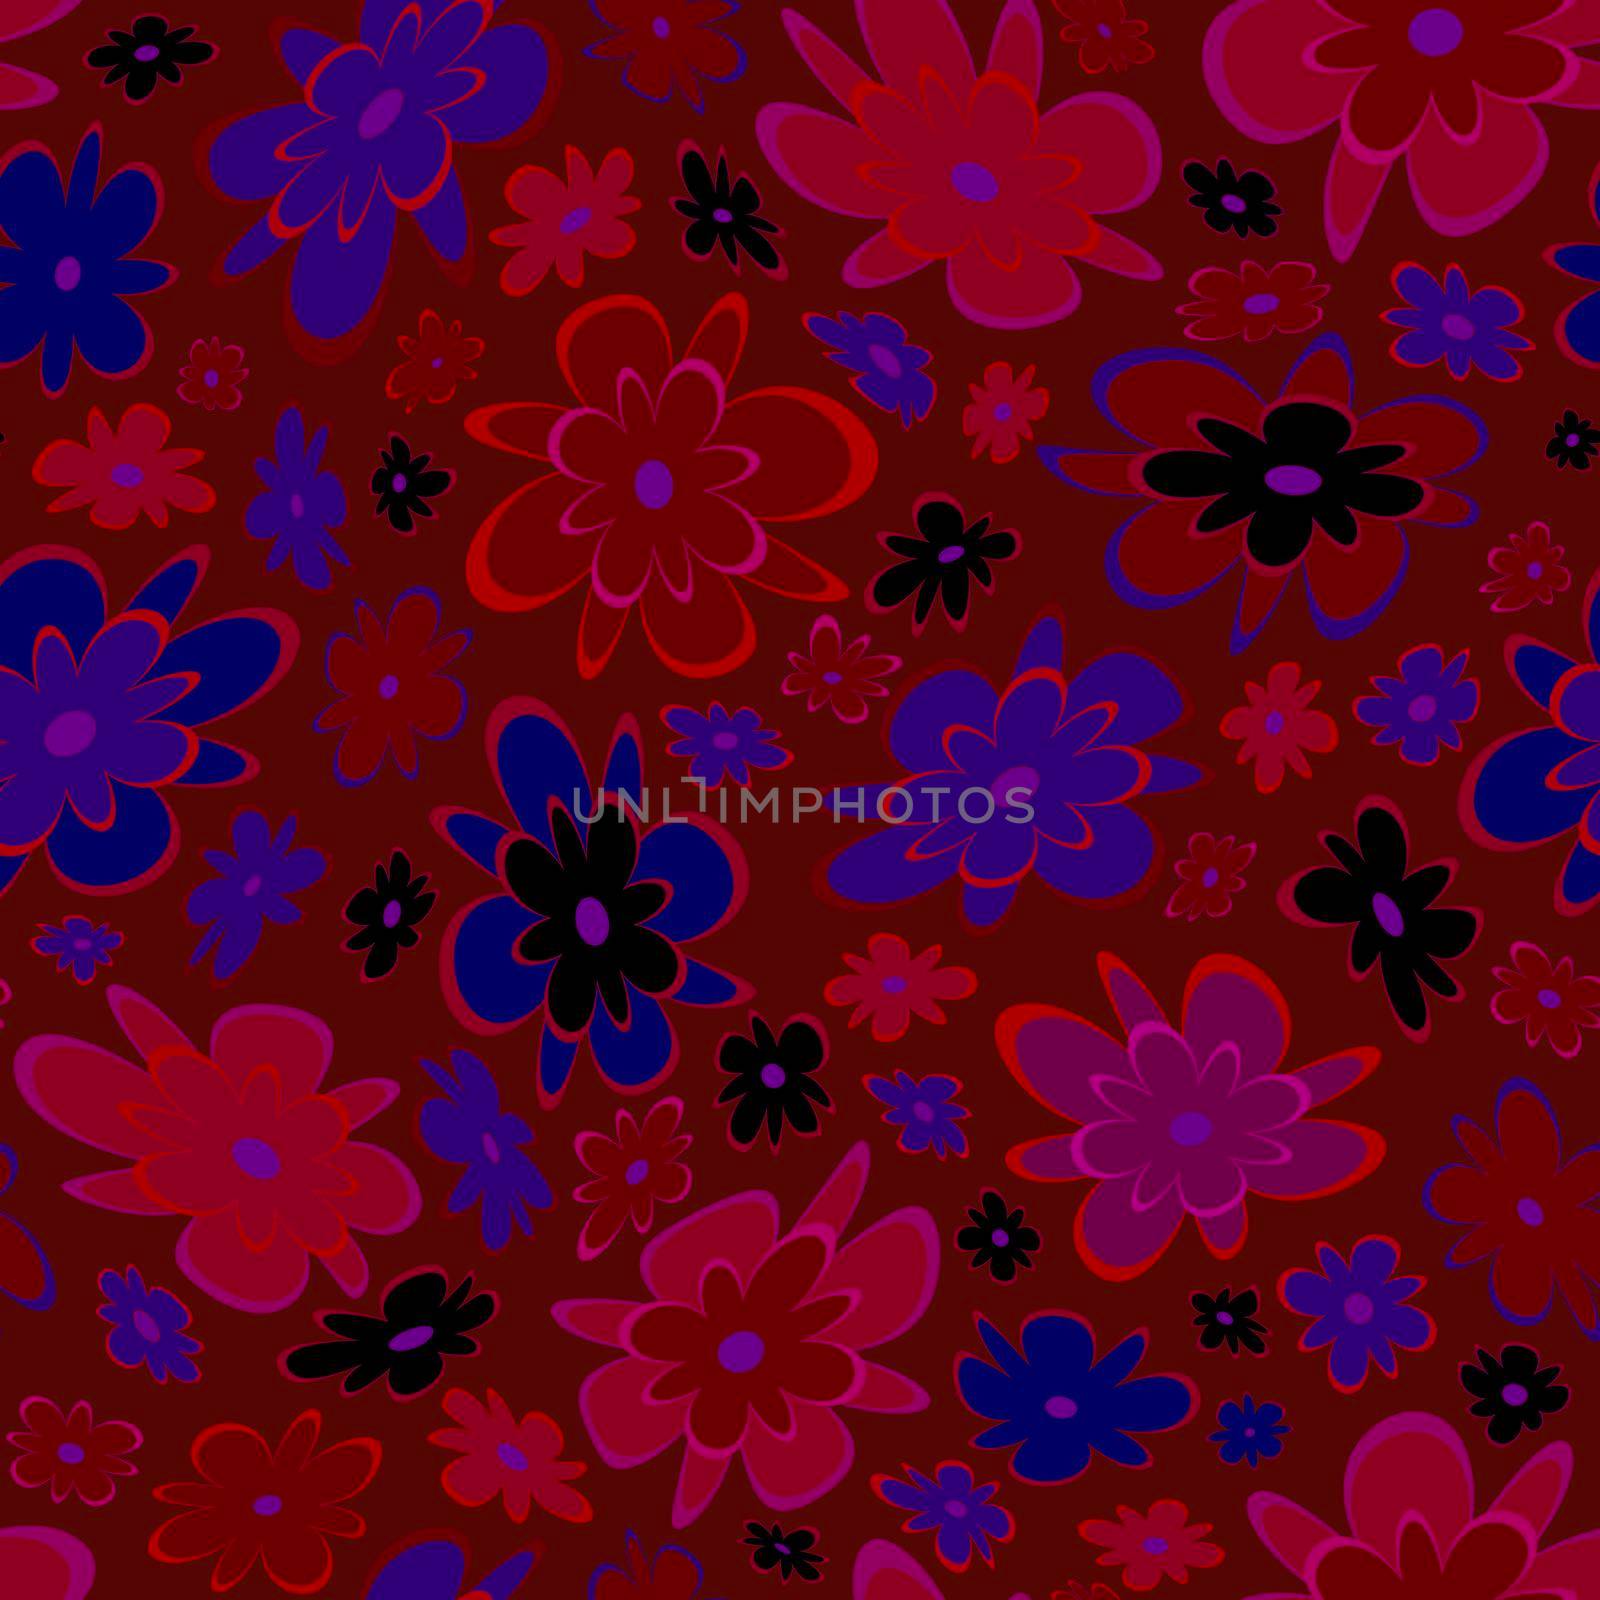 Trendy fabric pattern with miniature flowers.Summer print.Fashion design.Motifs scattered random.Elegant template for fashion prints.Blue on burgundyGood for fashion,textile,fabric,wrapping paper